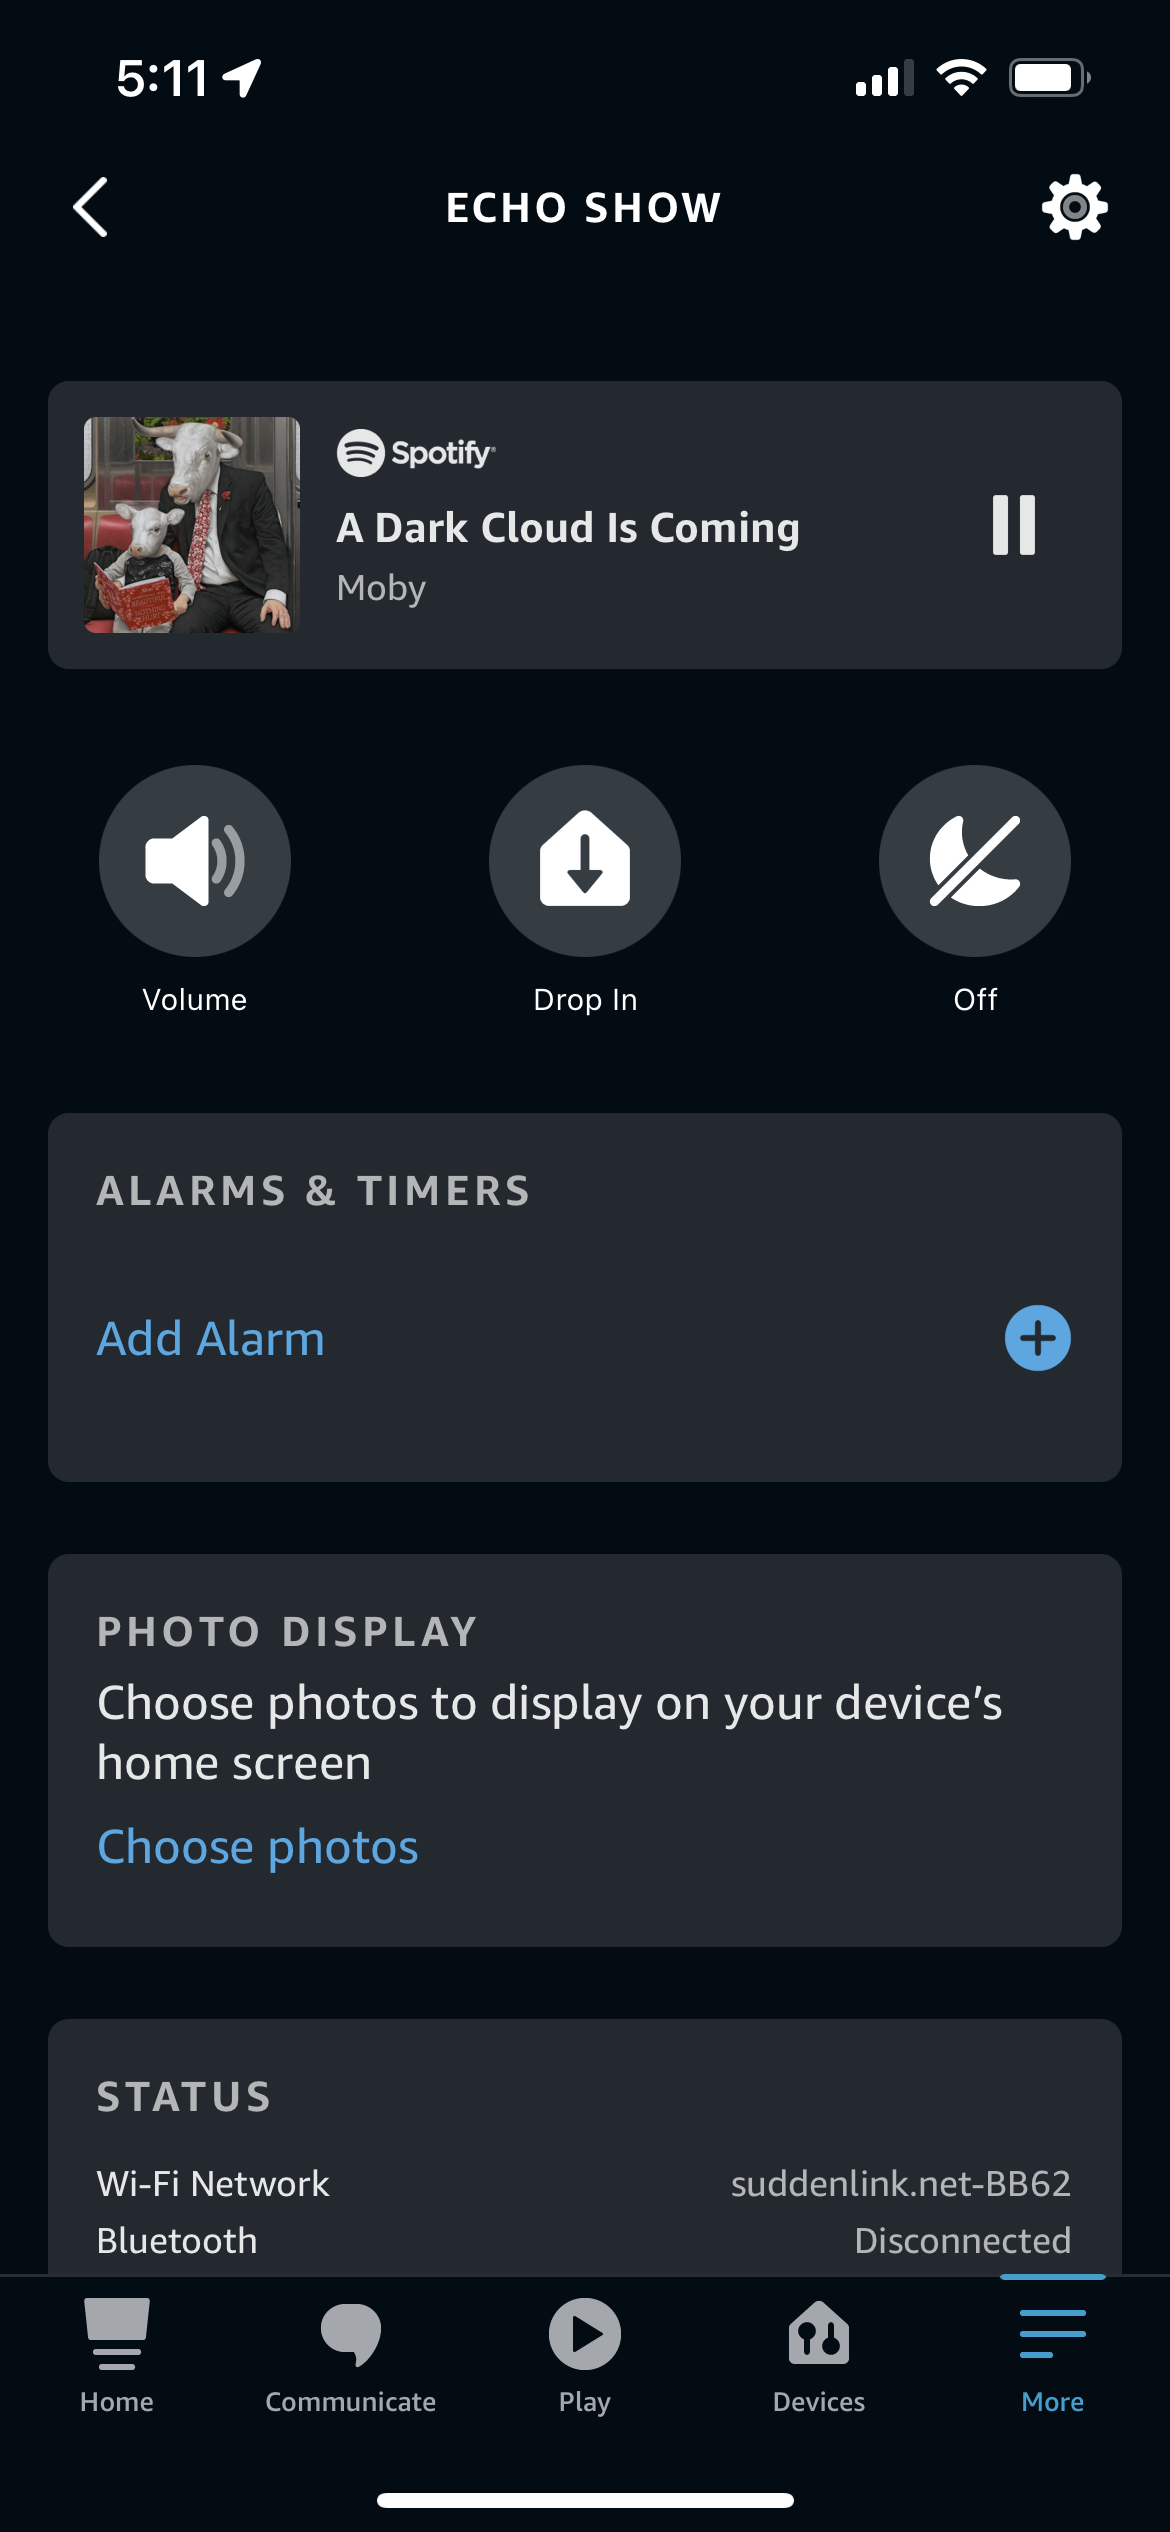 The device page for an Echo Show in the Alexa app